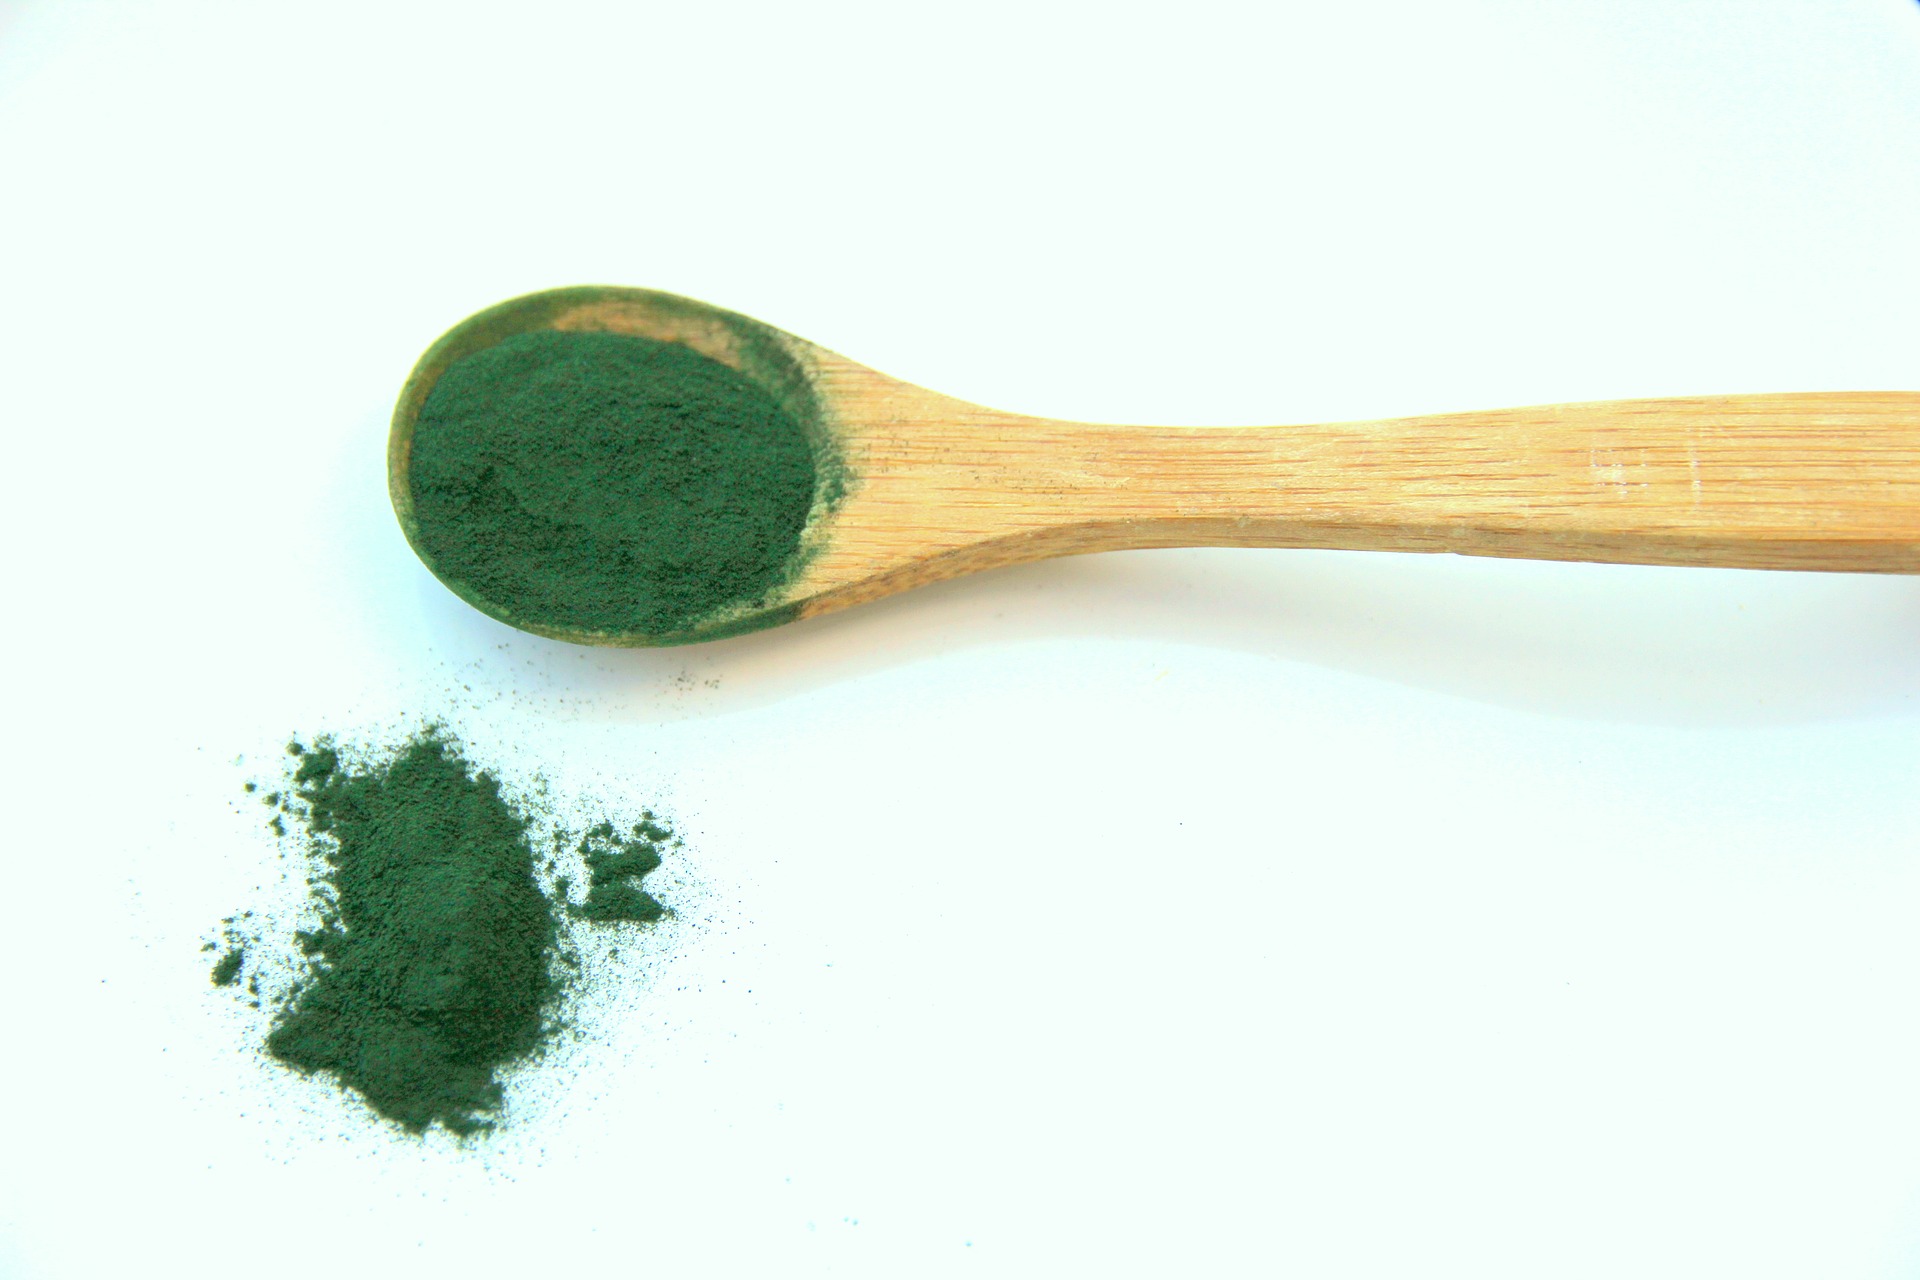 What Are The Health Benefits Of Spirulina Powder?